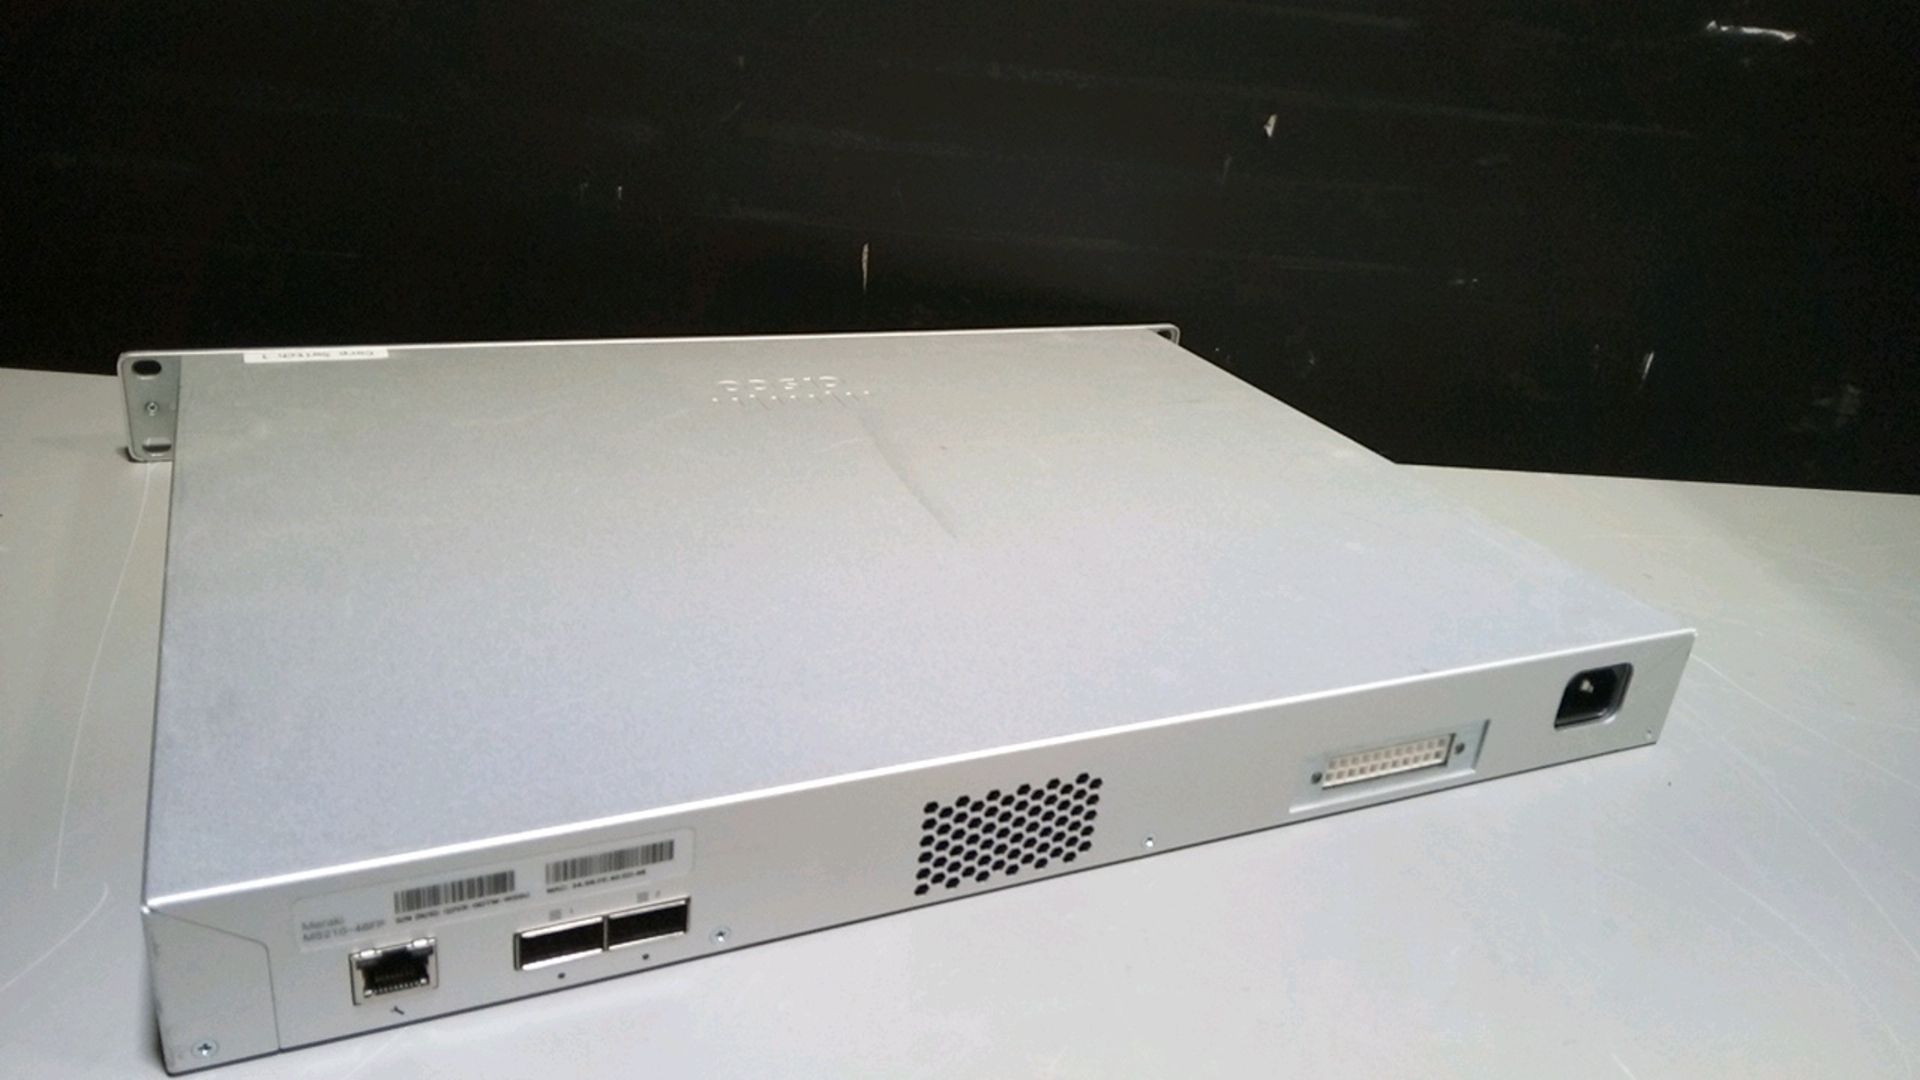 CISCO SYSTEMS MERAKI M210-48FP SWITCH LOCATED AT: 2440 GREENLEAF AVE, ELK GROVE VILLAGE IL - Image 2 of 3